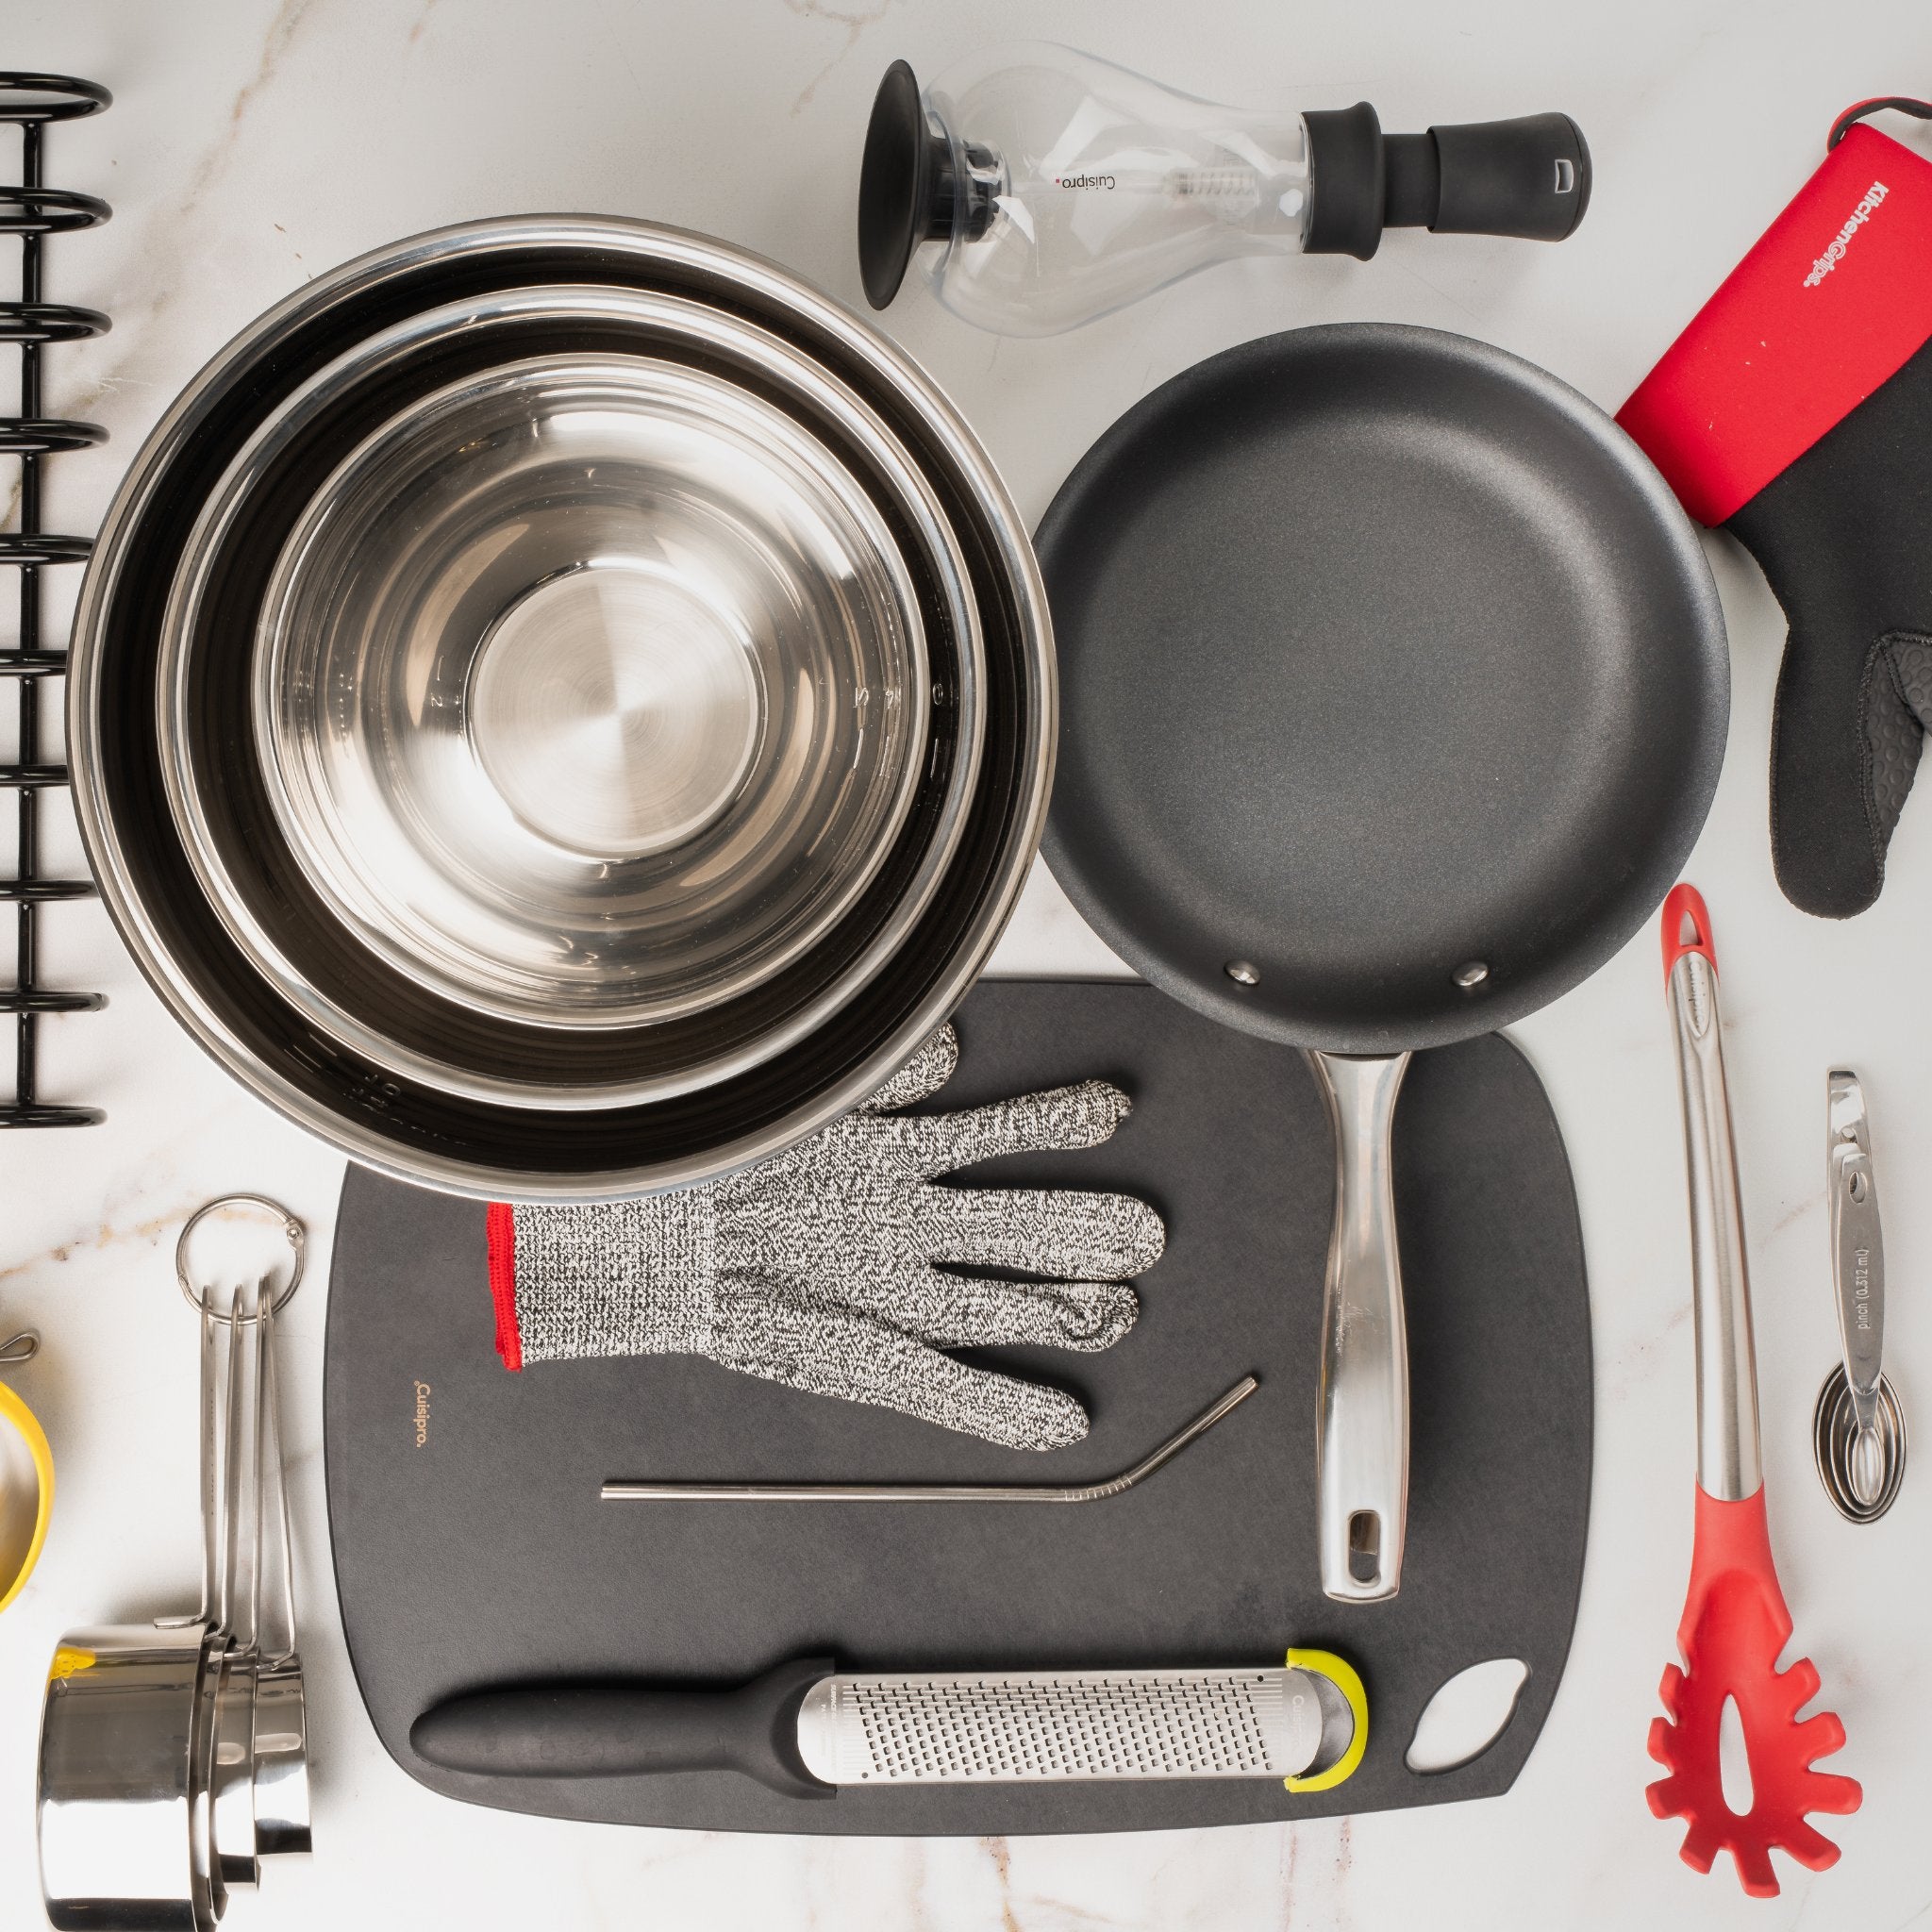 Product Care - Cooks' Tools